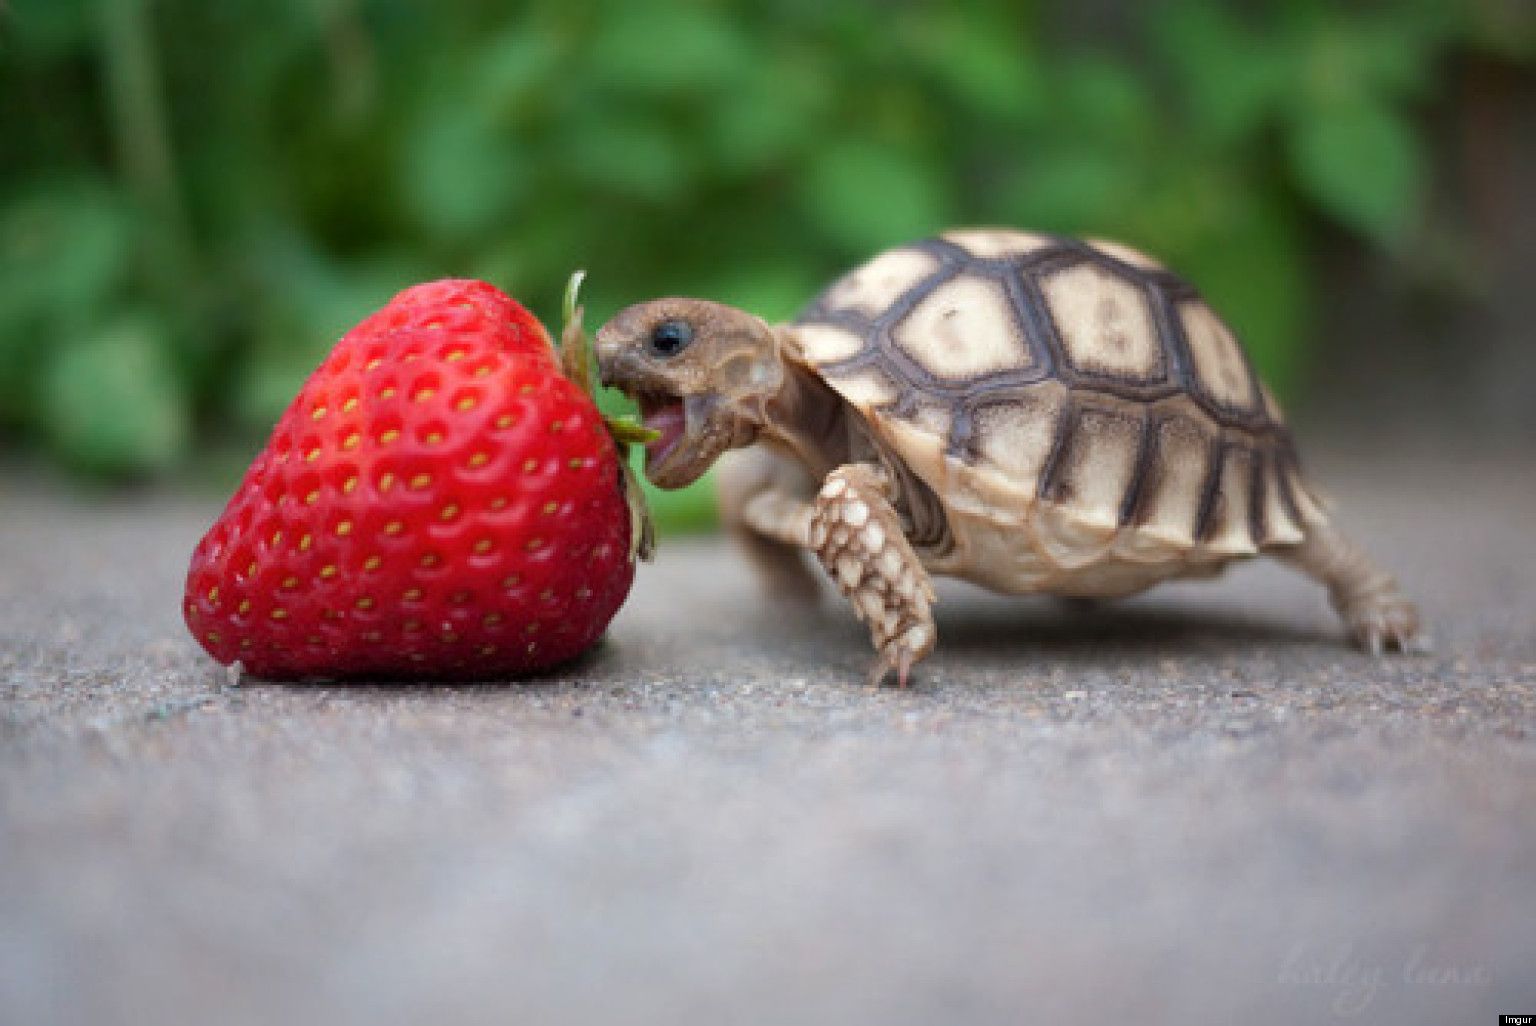 Cute Turtle -   Cute Turtle Pictures